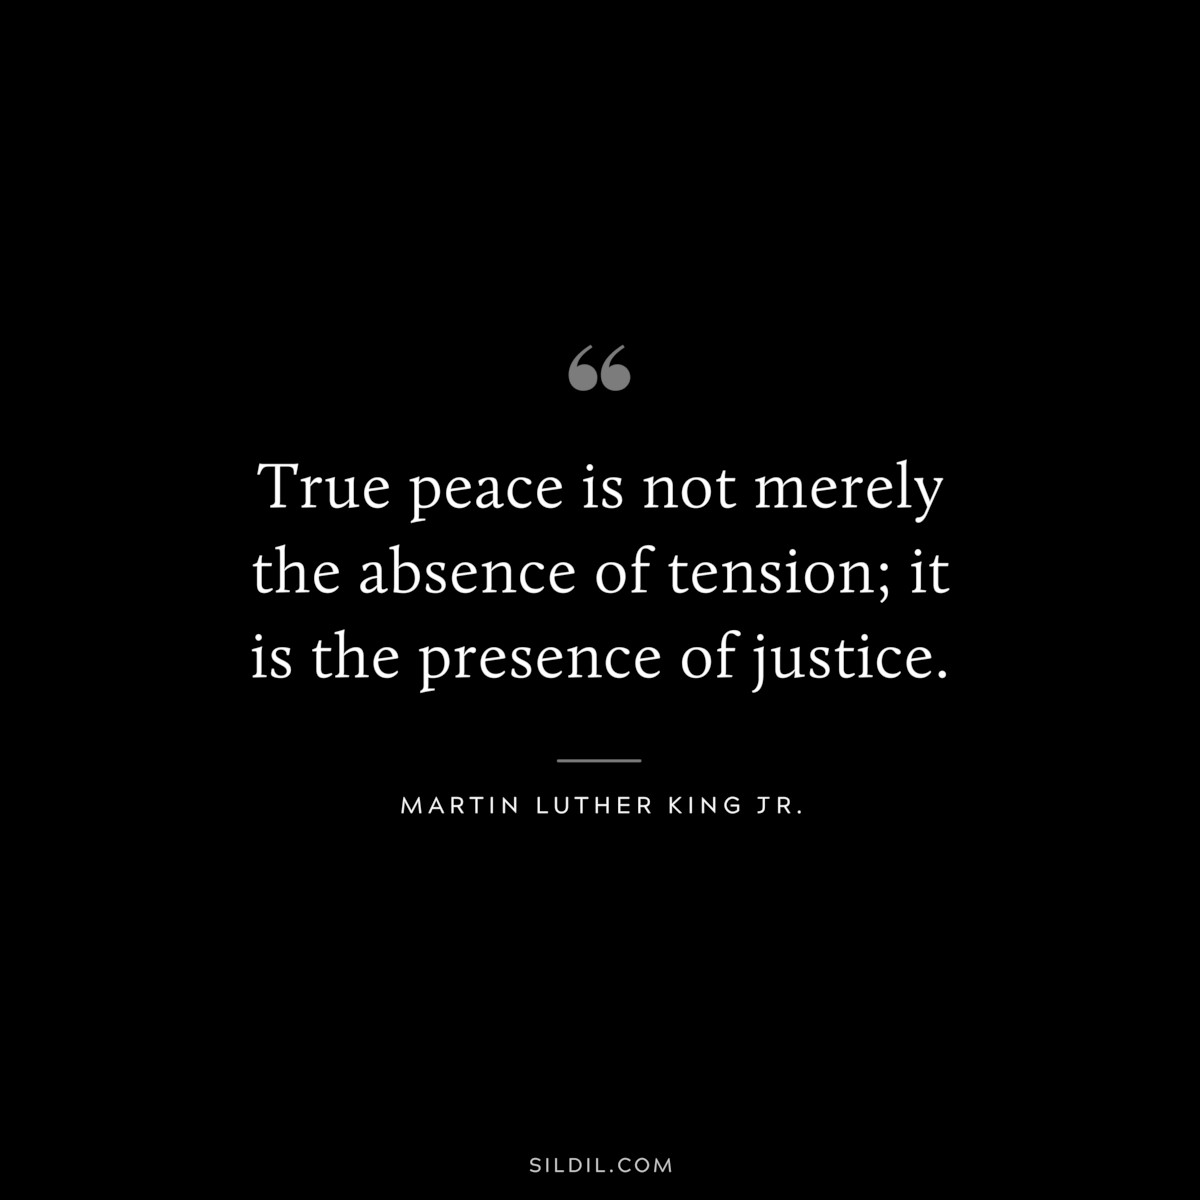 True peace is not merely the absence of tension; it is the presence of justice. ― Martin Luther King Jr.